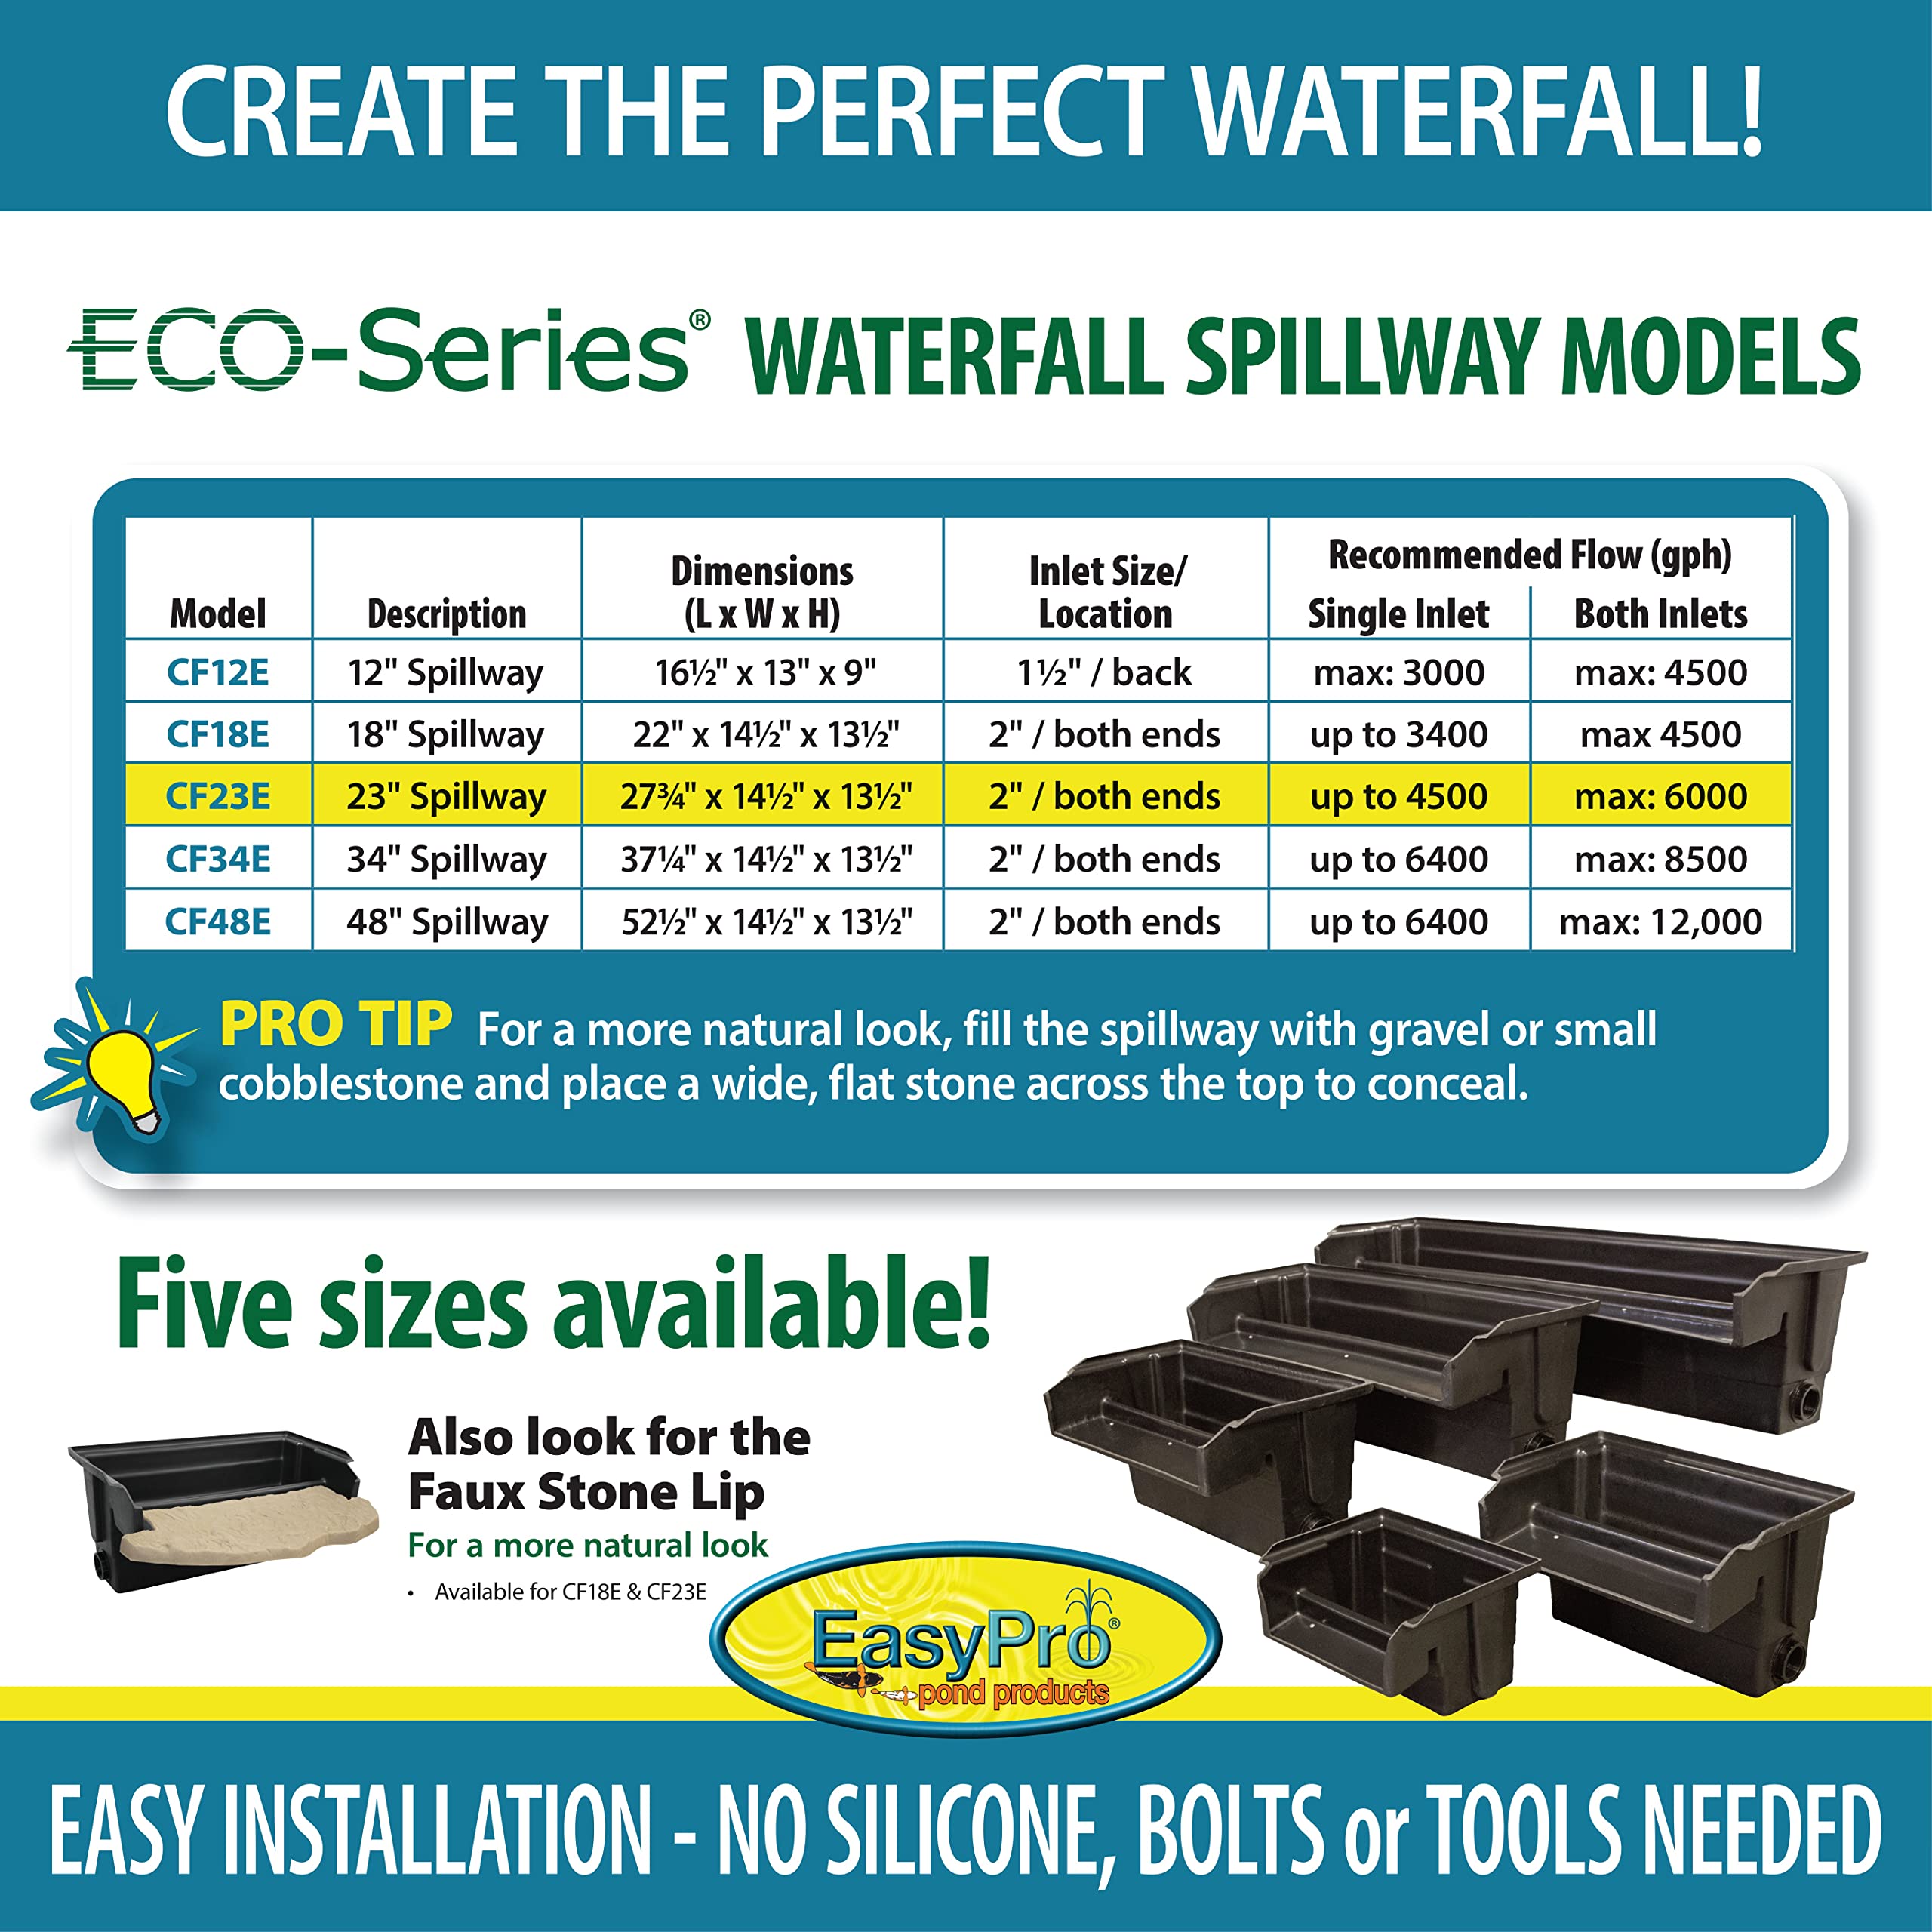 EasyPro Pond Products CF23E Eco-Series 23” Waterfall Spillway is Ideal for Just-A-Falls Water Features. Connect Liner Without Tools. 2-2” Installed Spinweld Inlets. Up to 4500 to 6000 GPH Flow